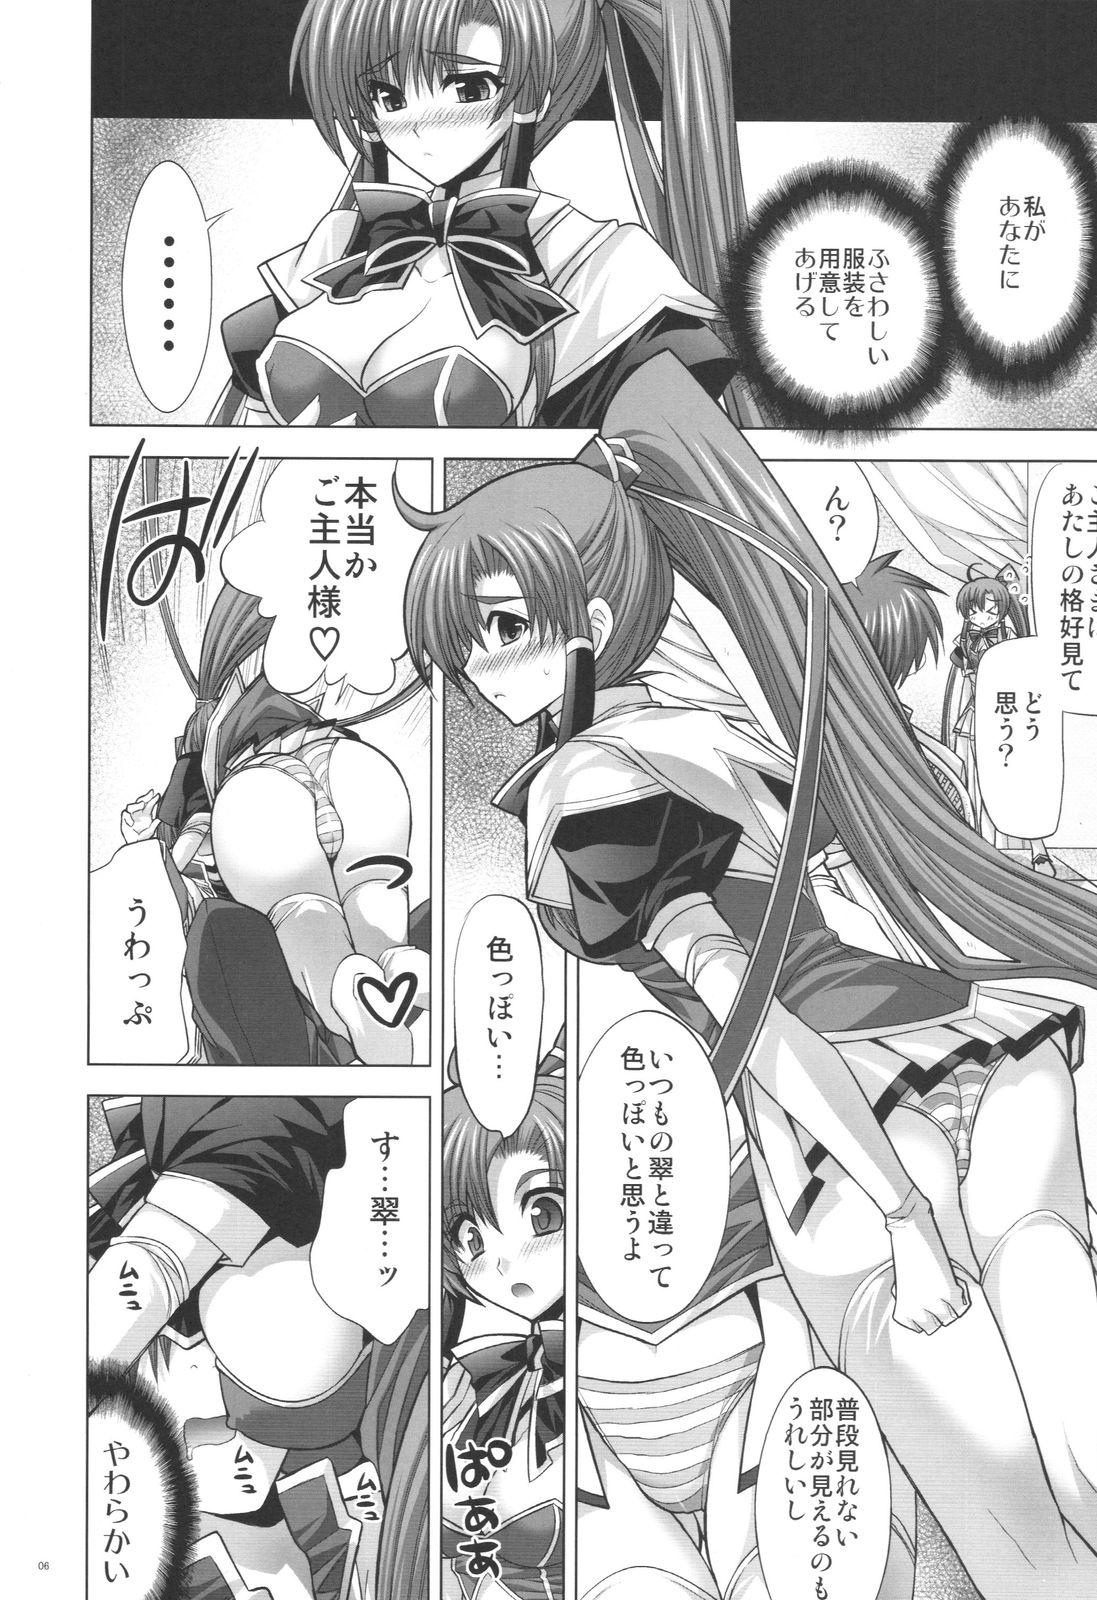 Striptease Inconstant - Koihime musou Load - Page 5